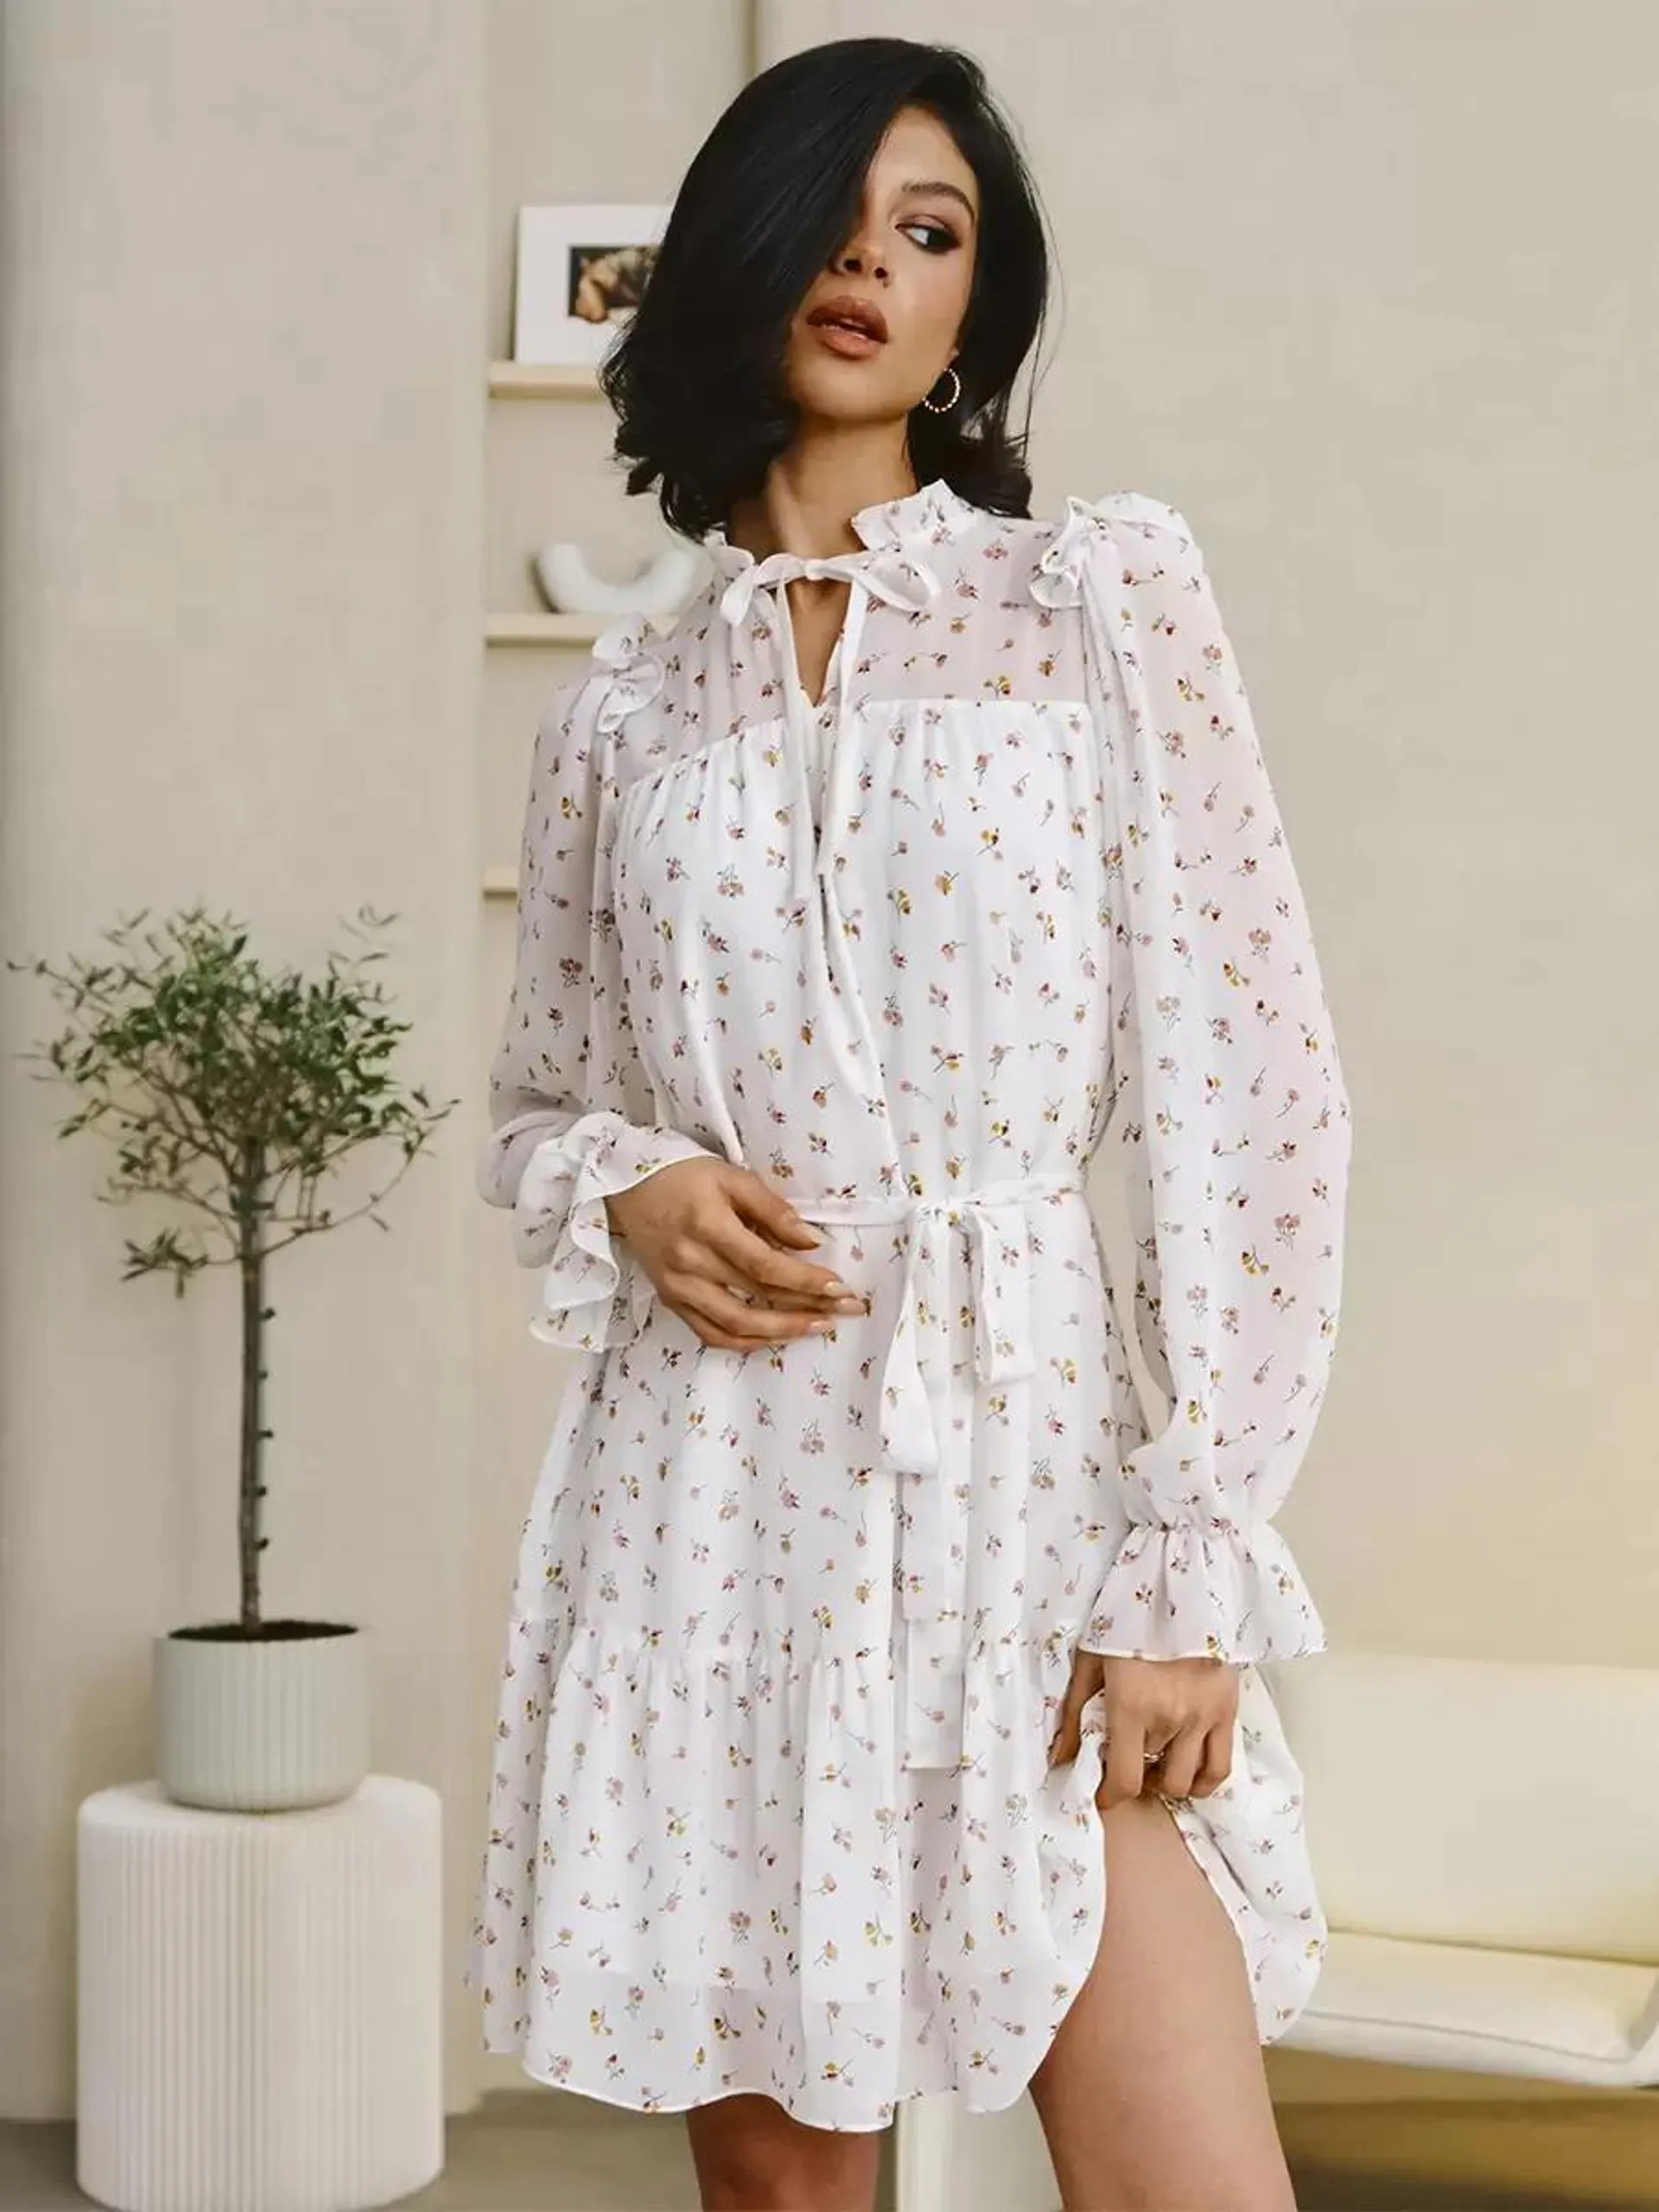 Floral Dress Midi Dress Floral Print Long Sleeves Embellished Collar Chic Oversized Lace Up No Open Seam Long Fall